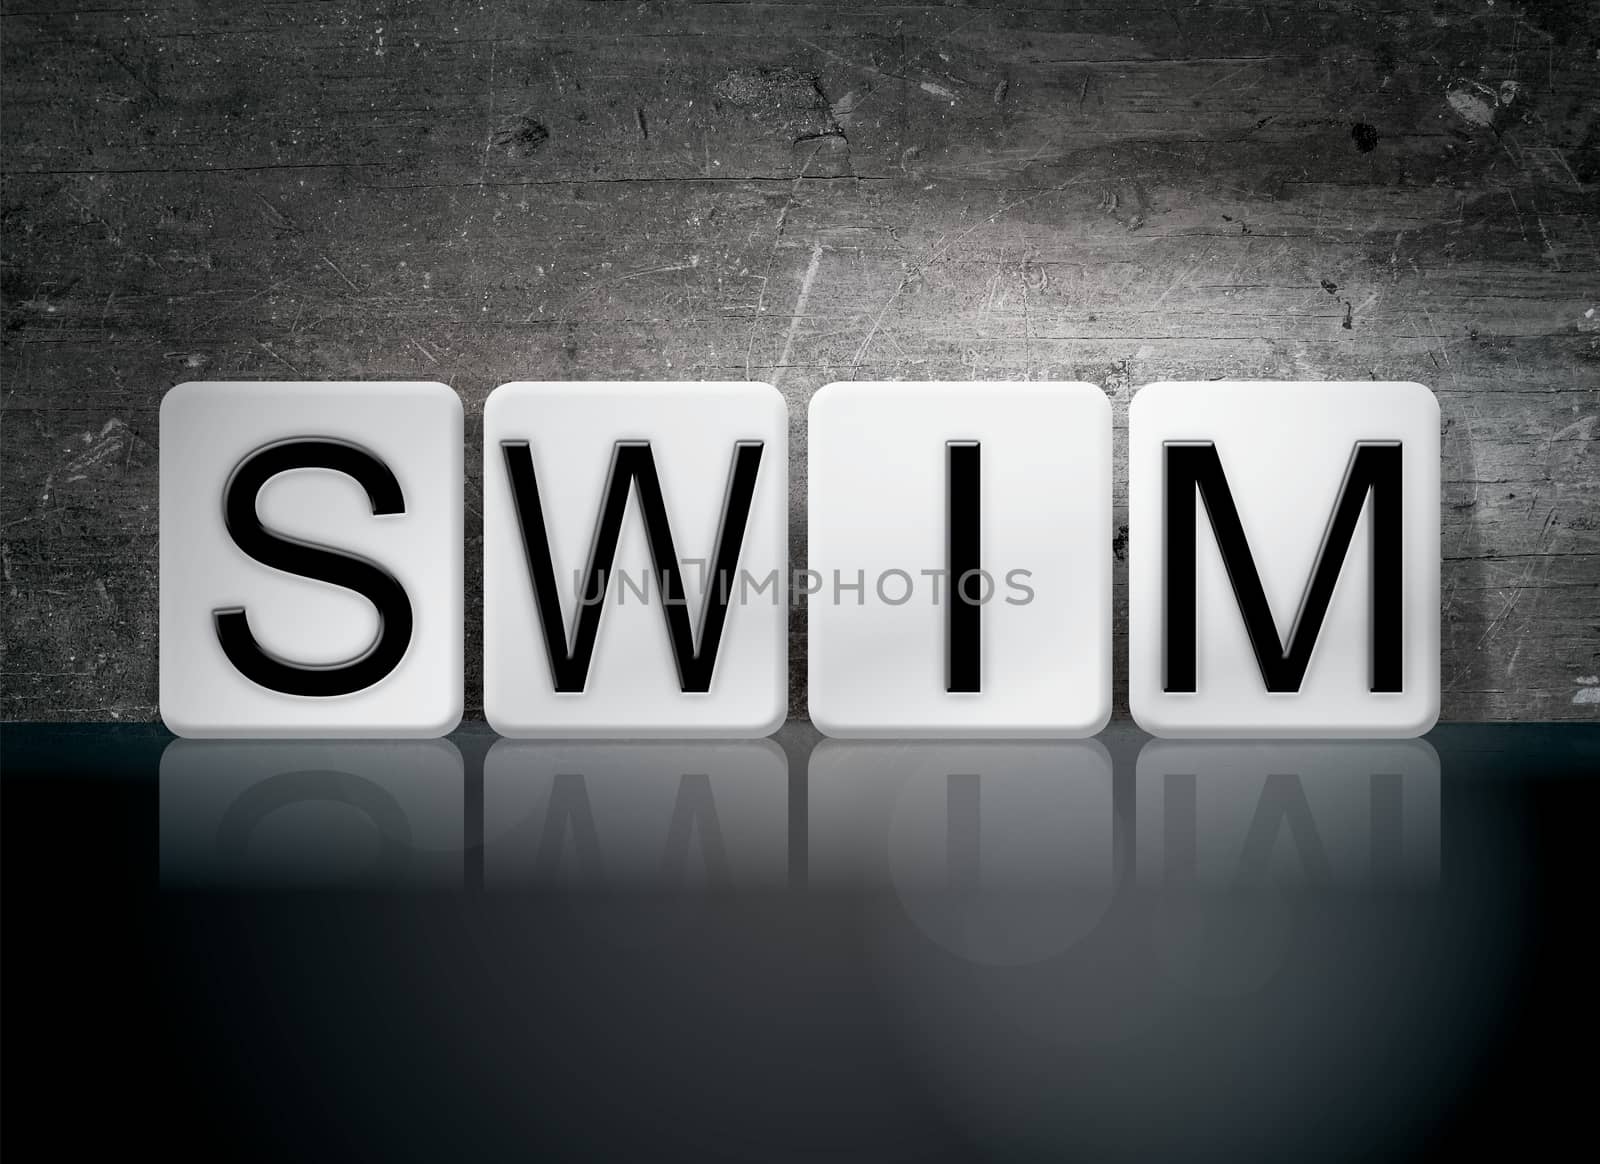 Swim Tiled Letters Concept and Theme by enterlinedesign